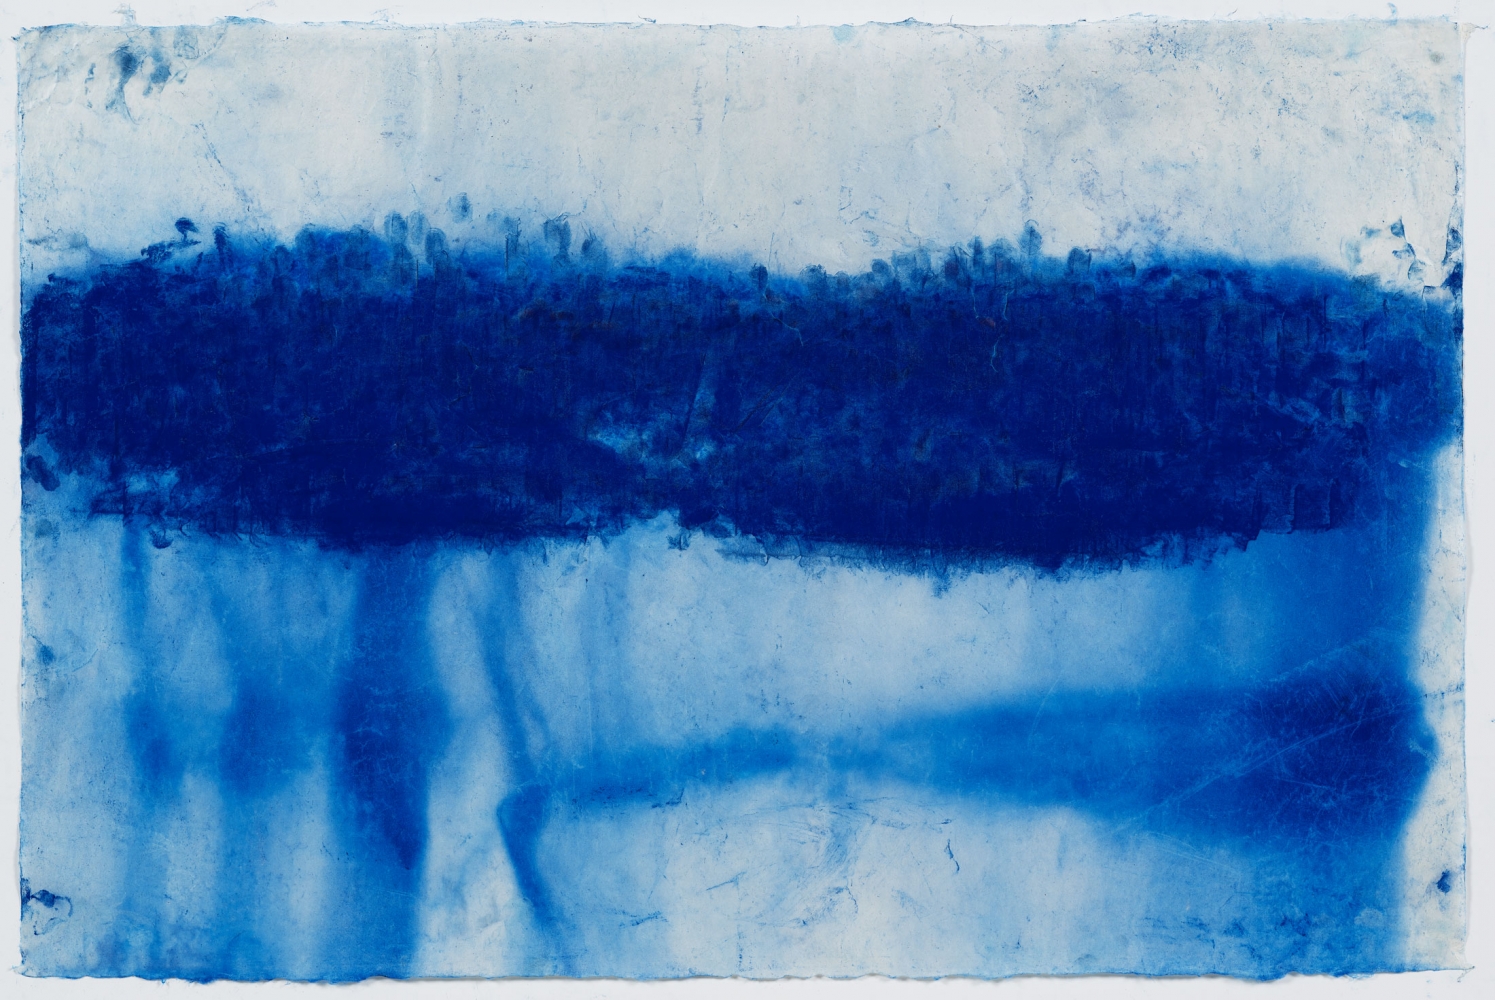 Jason Moran
Bathing the Room with Blues 3, 2020
Pigment on Gampi paper
25 3/8 x 38 1/4 inches
(64.5 x 97.2 cm)